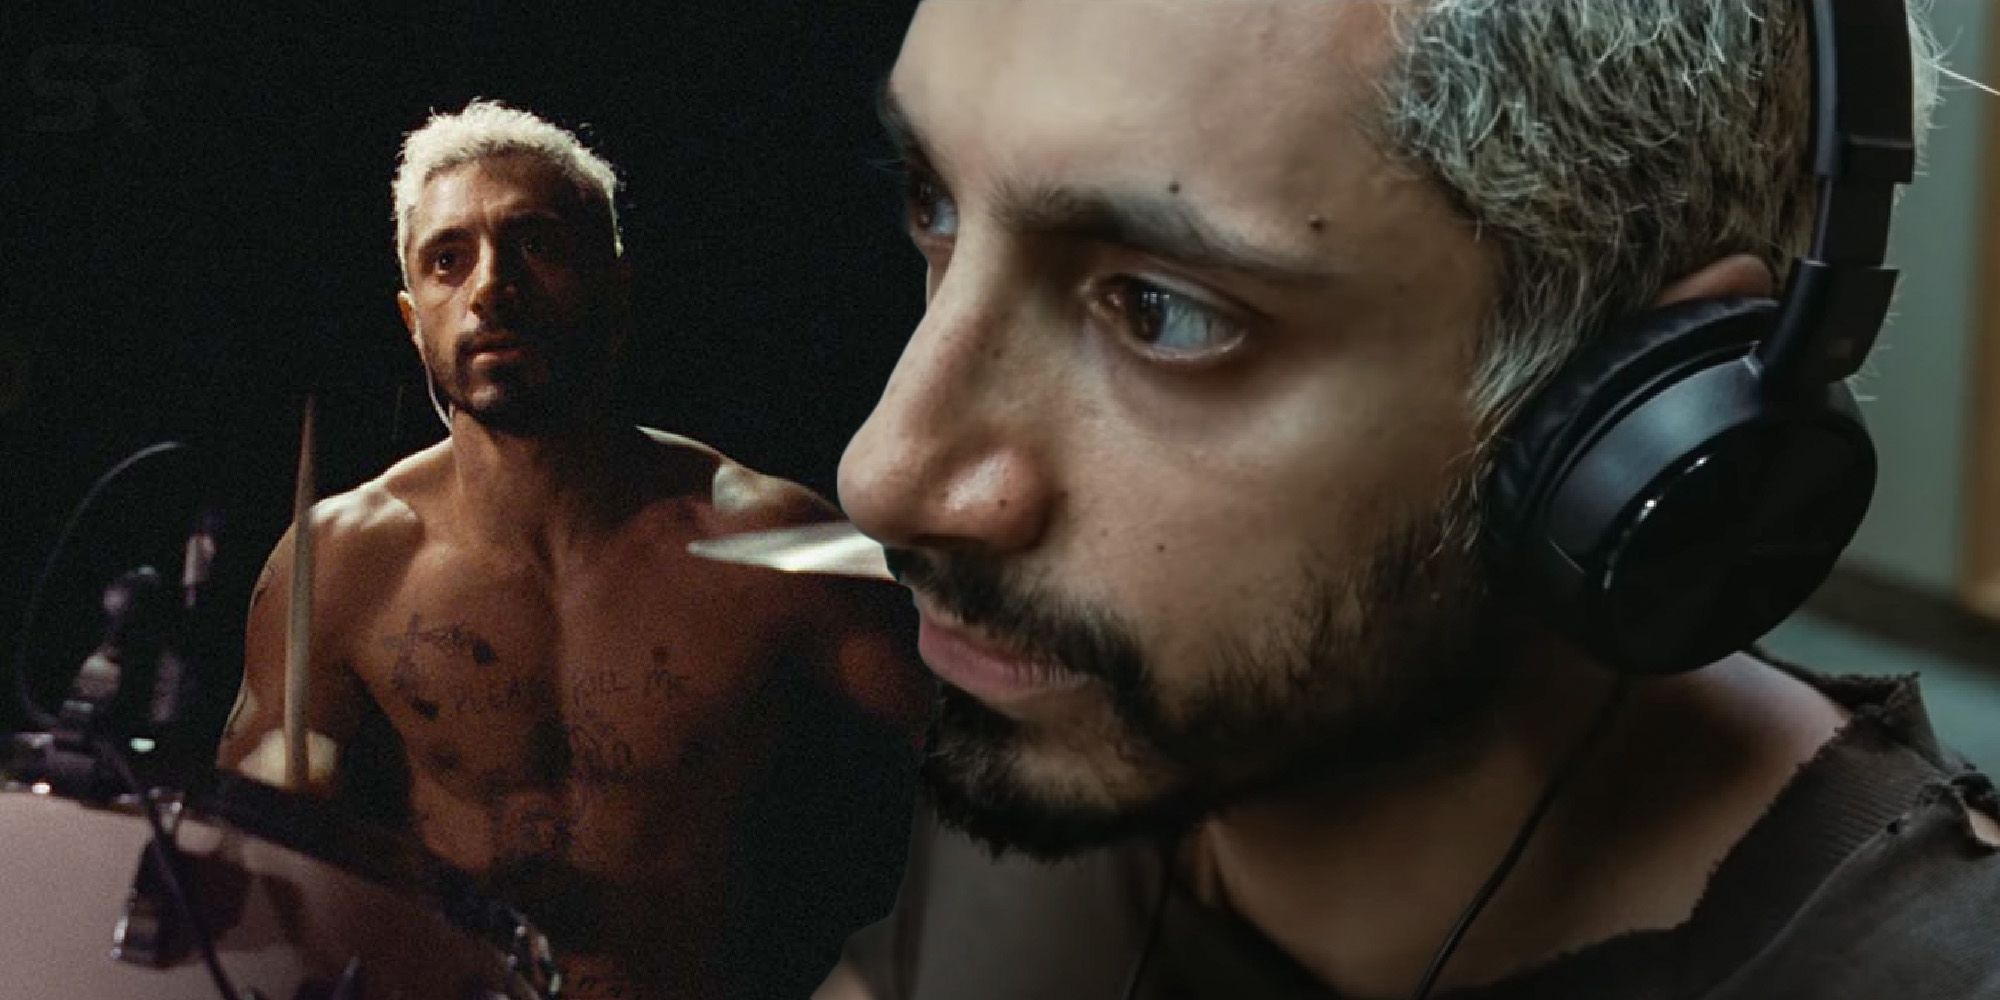 A collage of Ruben Stone (Riz Ahmed) drumming and wearing headphones in The Sound of Metal